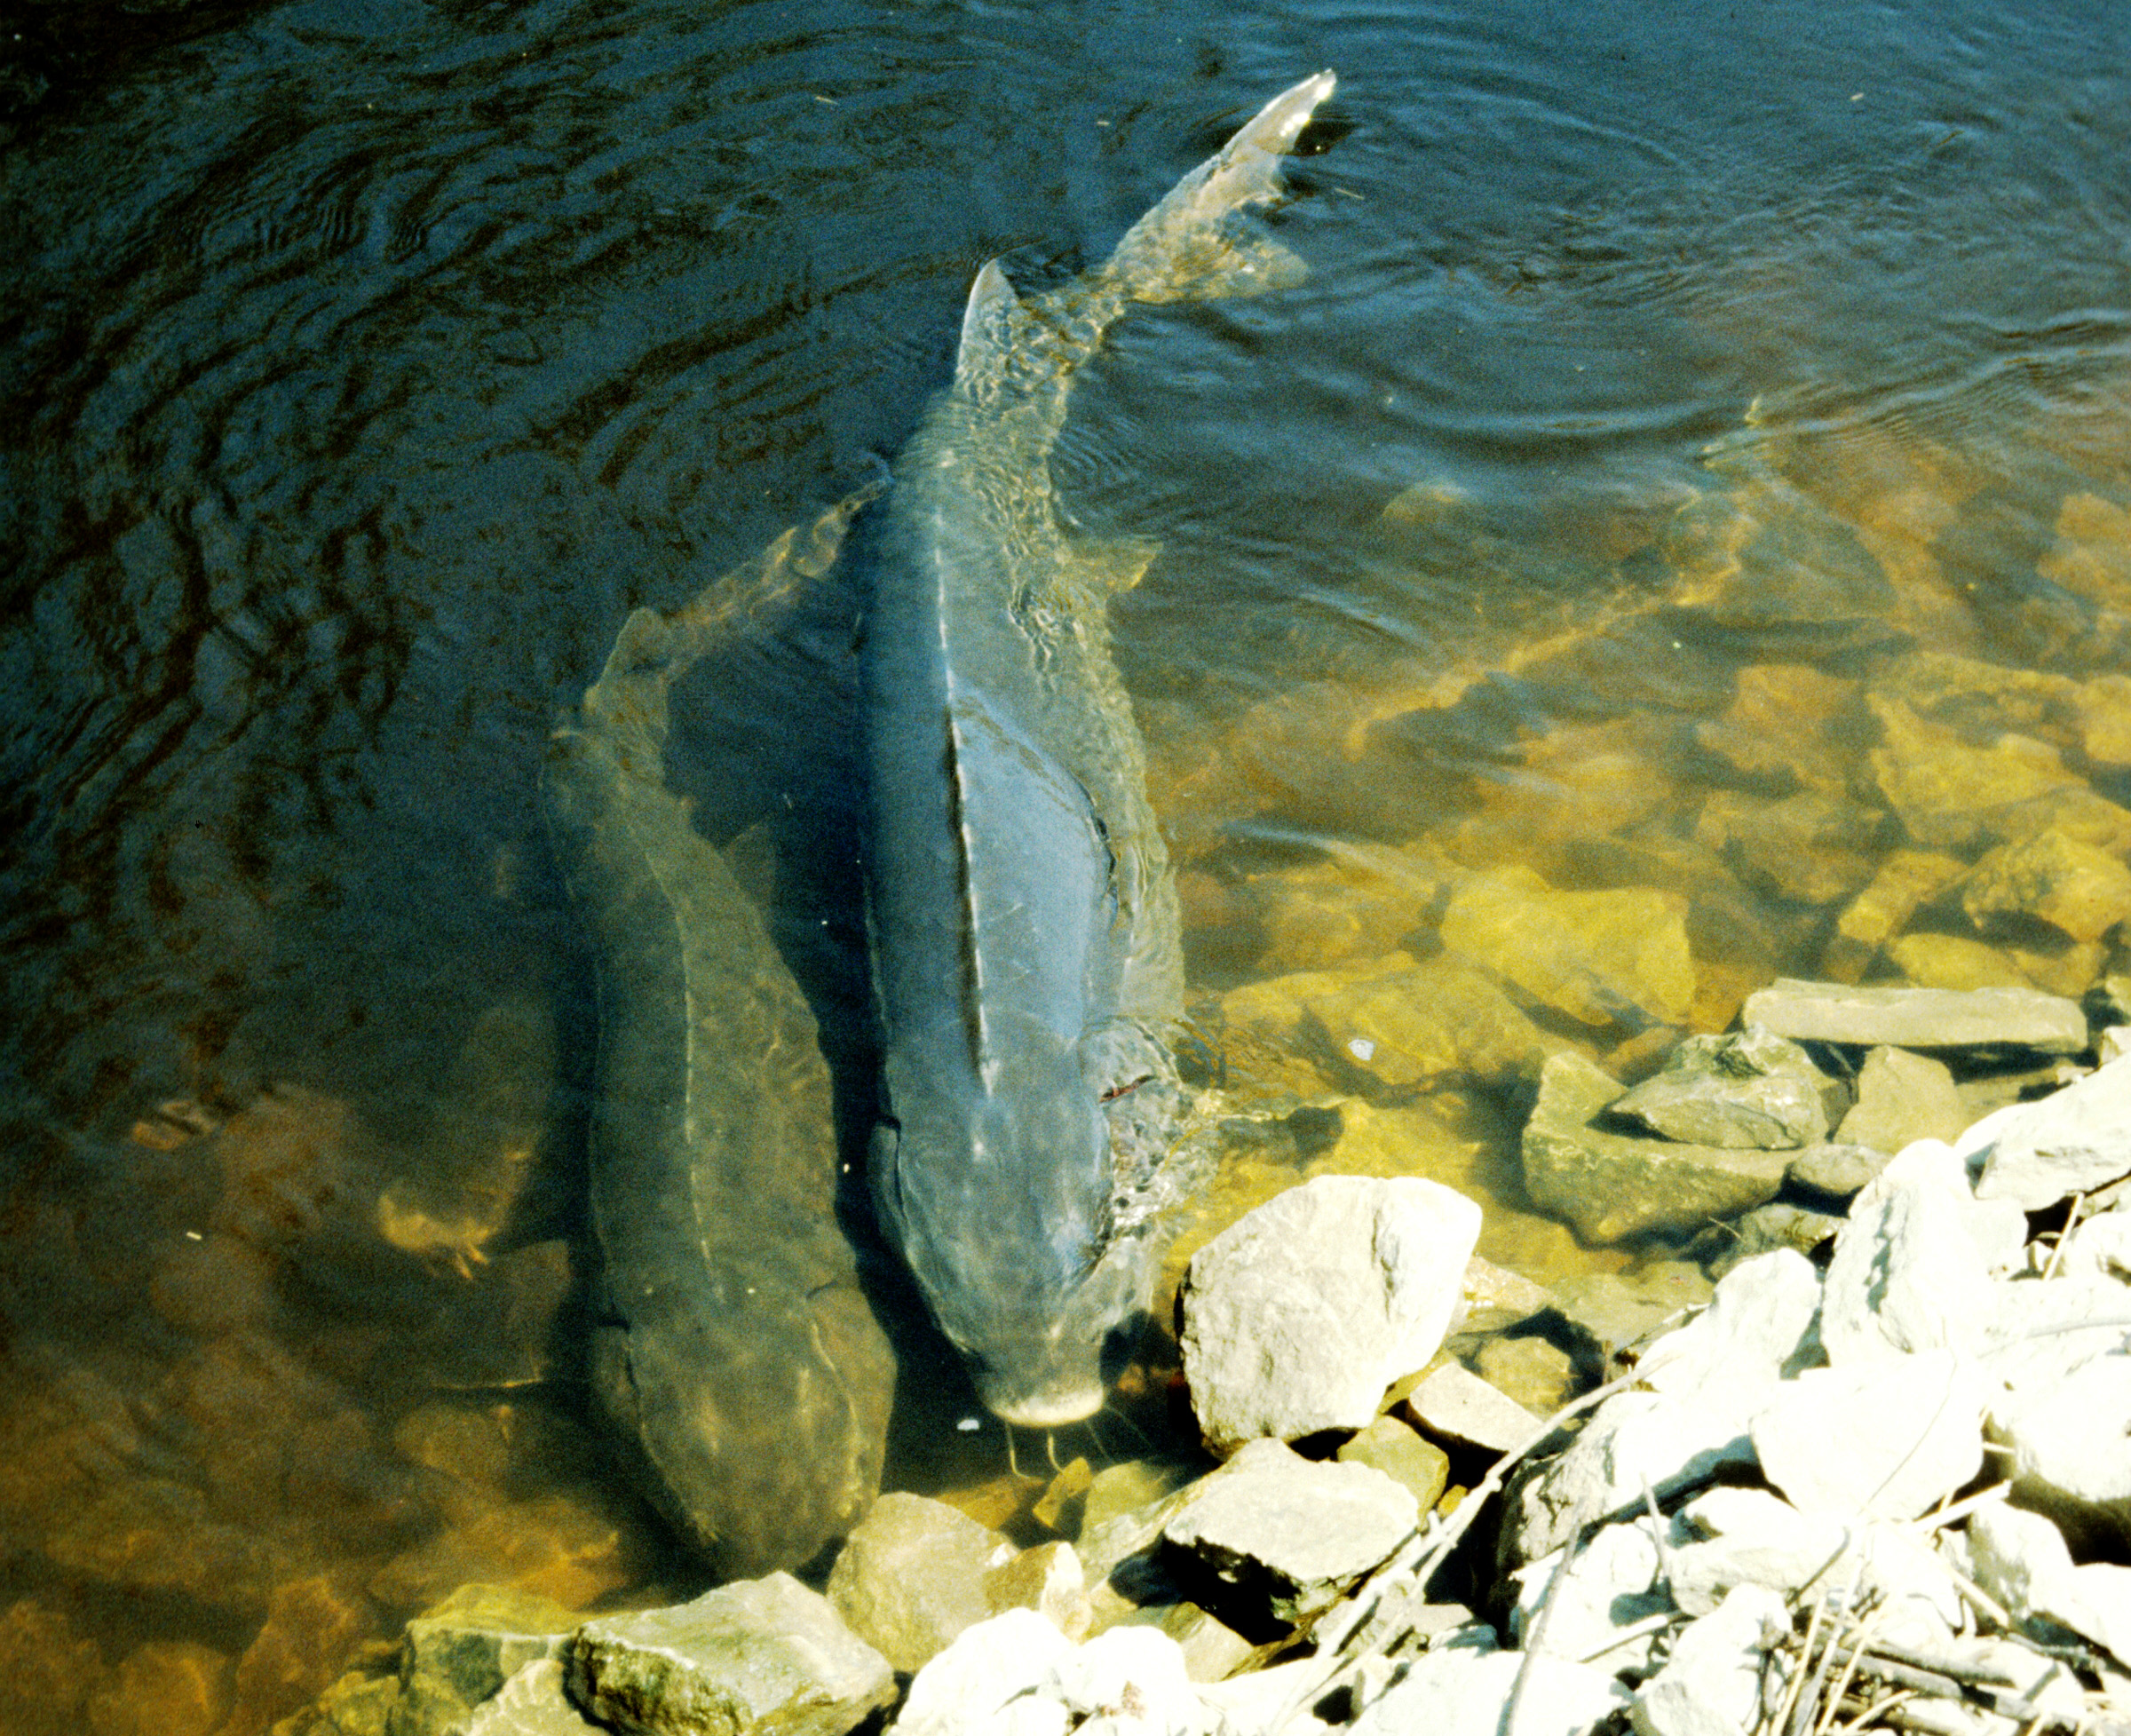 Conservation Groups Threaten Federal Suit To Protect Lake Sturgeon